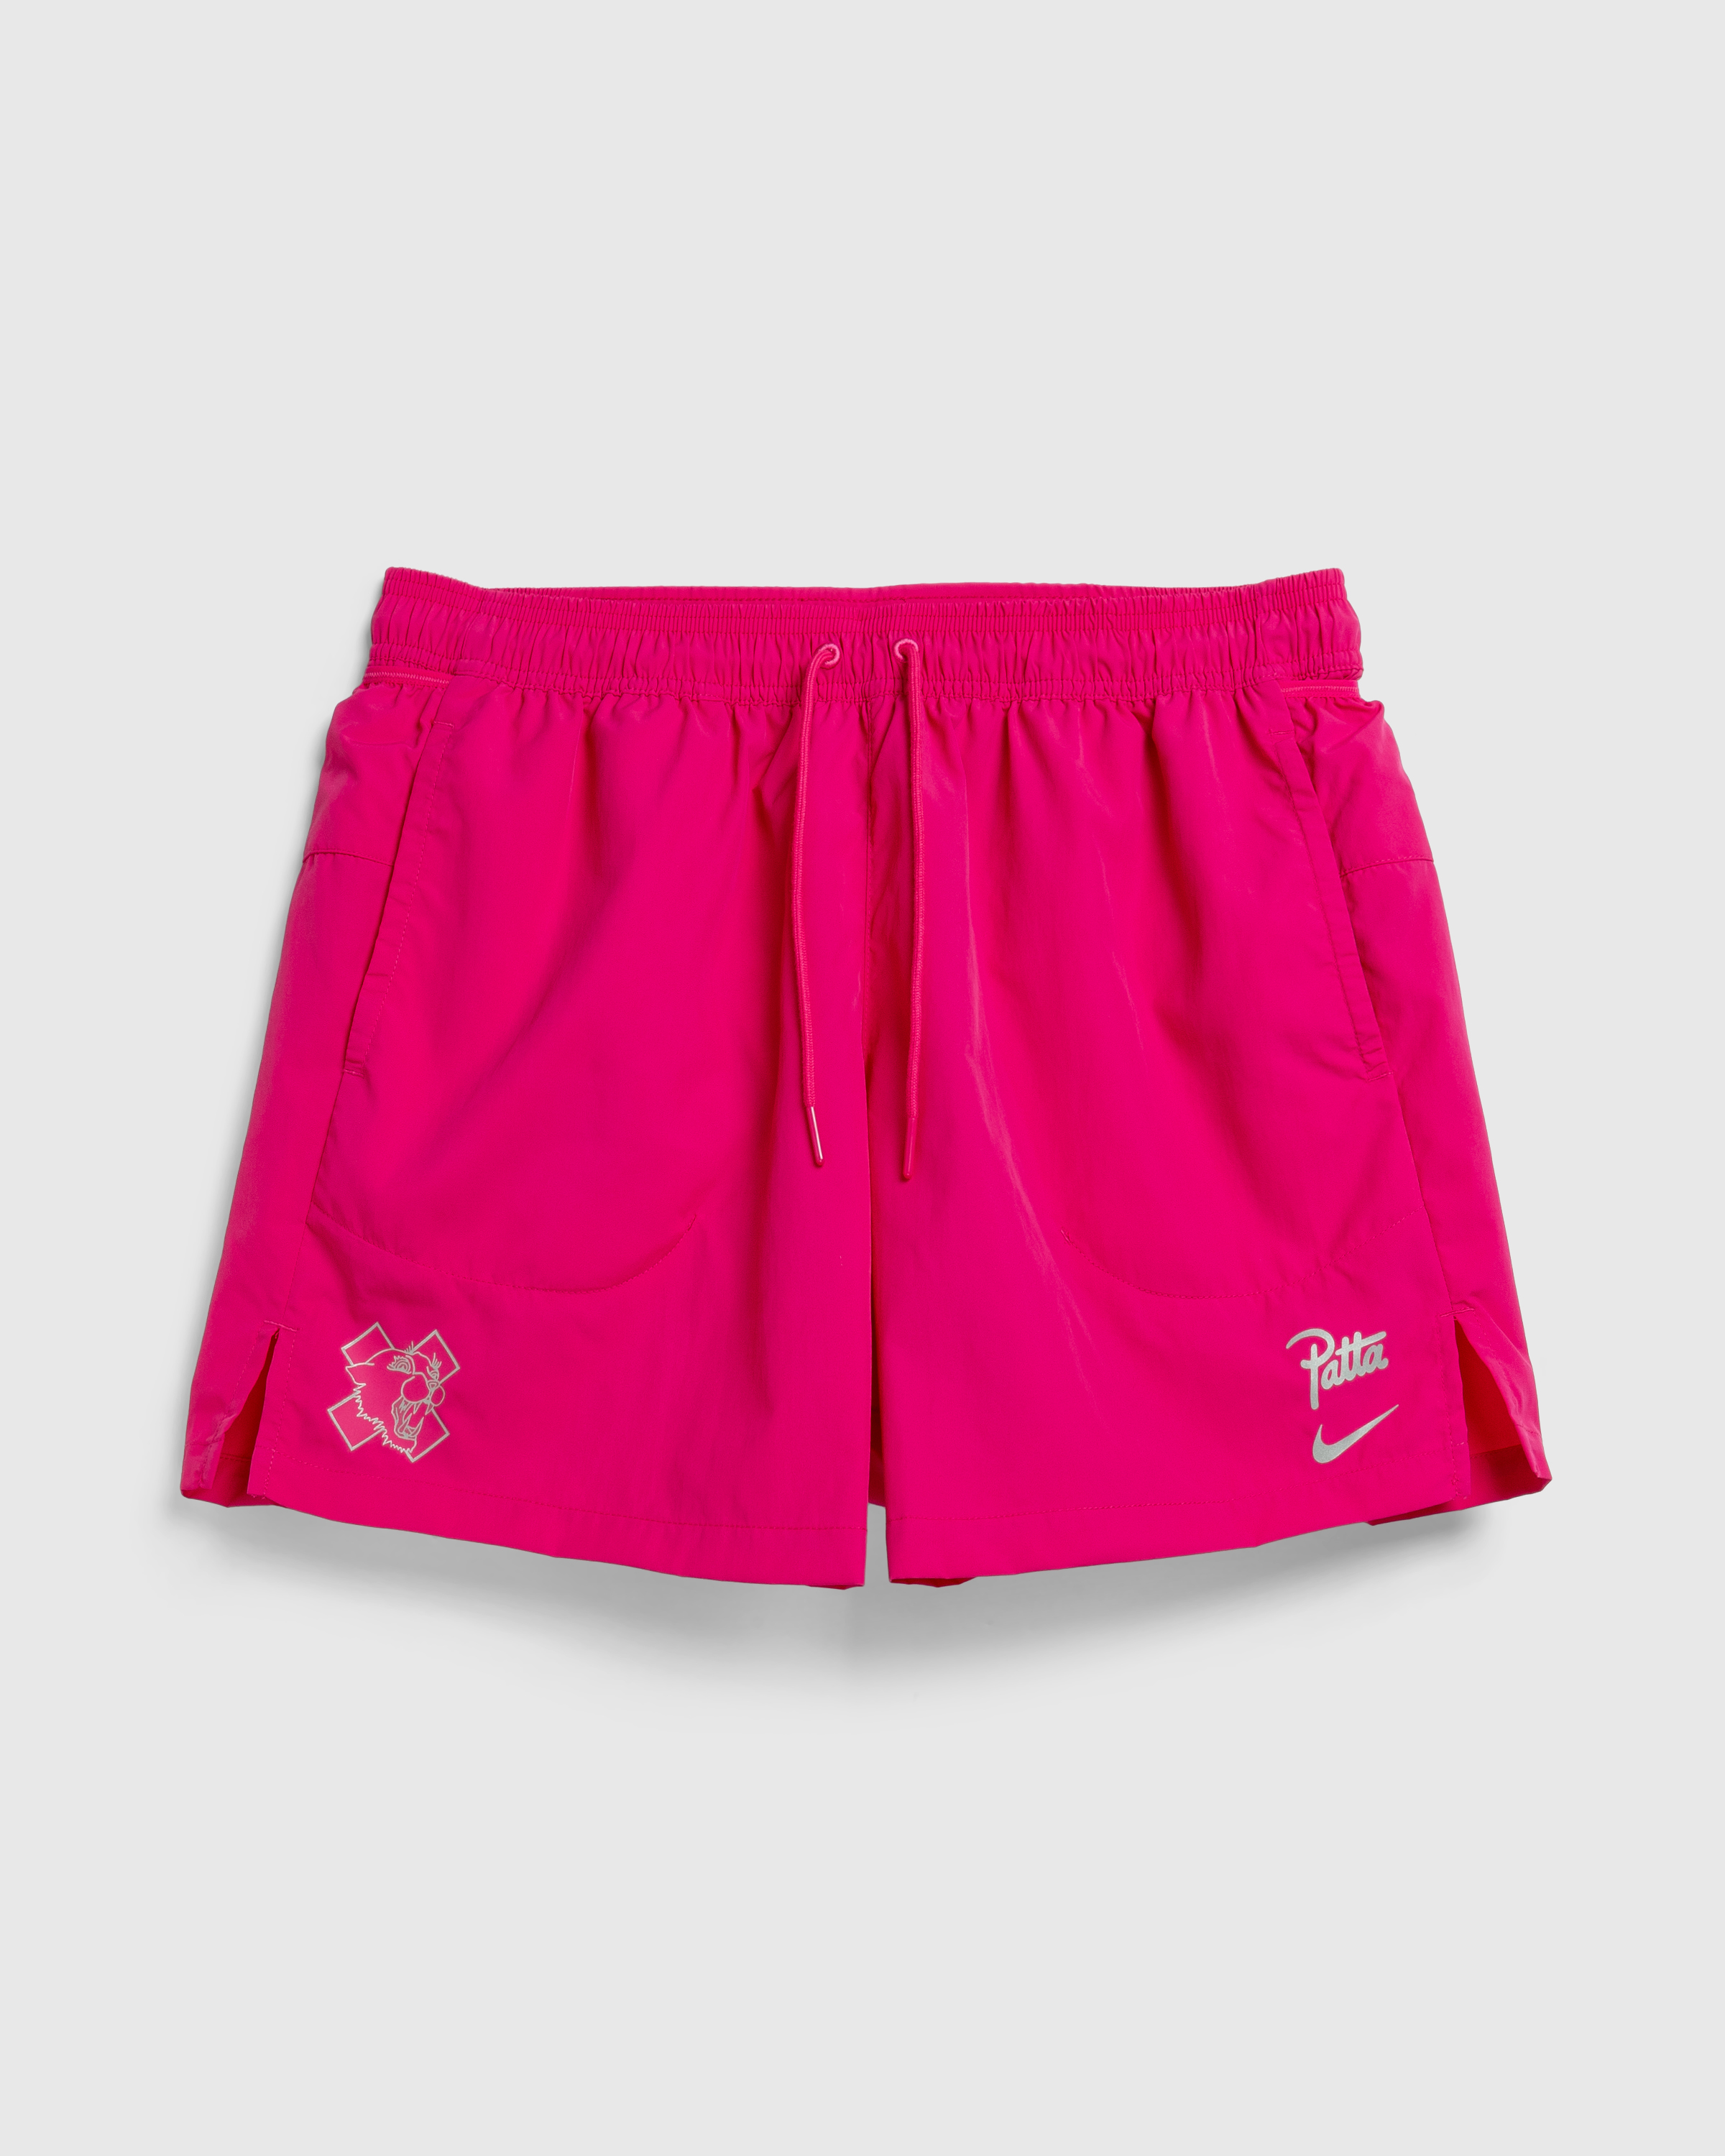 Nike x Patta – Men's Shorts Fireberry - Active Shorts - Red - Image 1